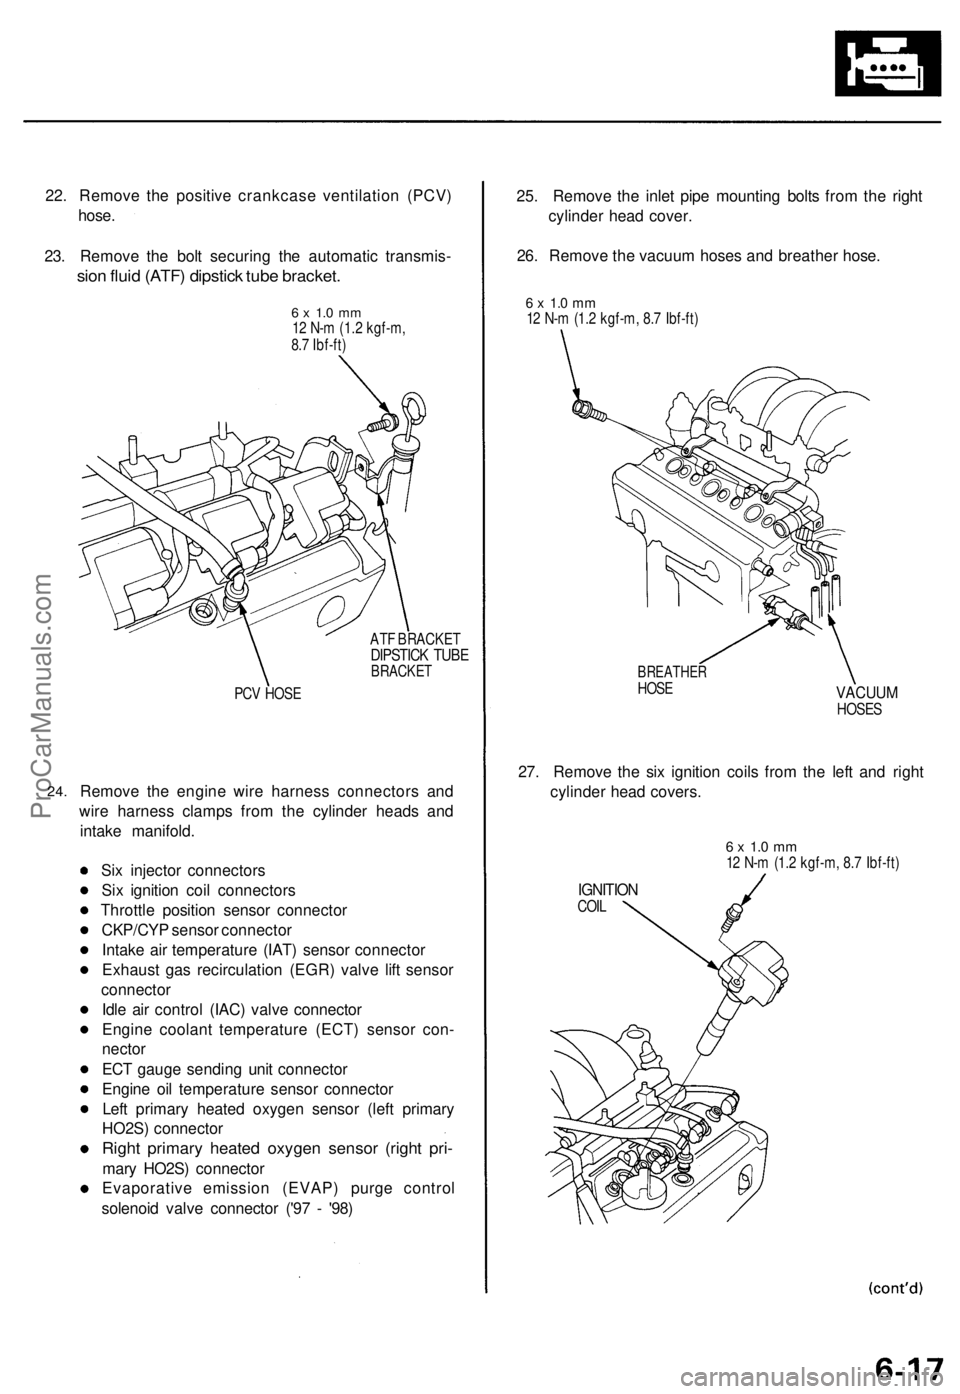 ACURA TL 1995  Service Repair Manual 
22. Remove the positive crankcase ventilation (PCV)

hose.

23. Remove the bolt securing the automatic transmis-

sion fluid (ATF) dipstick tube bracket.

6 x 1.0 mm

12 N-m (1.2 kgf-m,

8.7 Ibf-ft)
